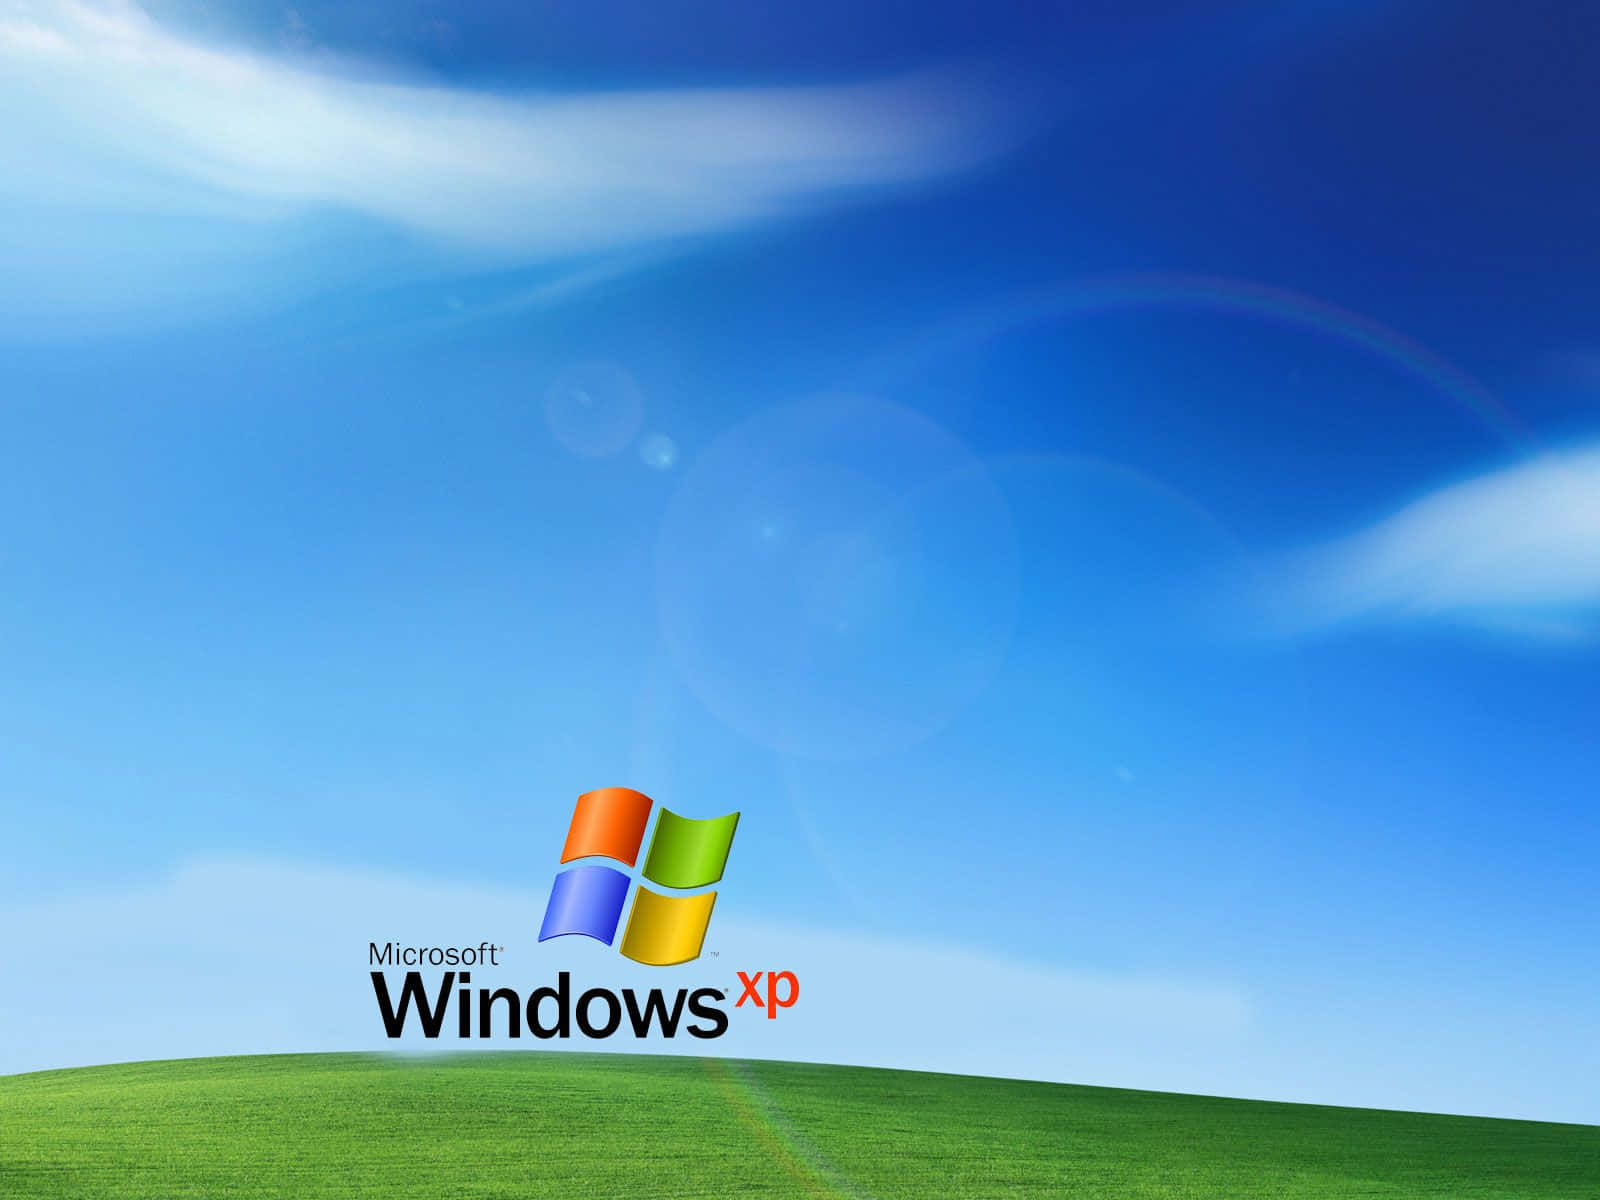 "The familiar blue background of Windows XP"